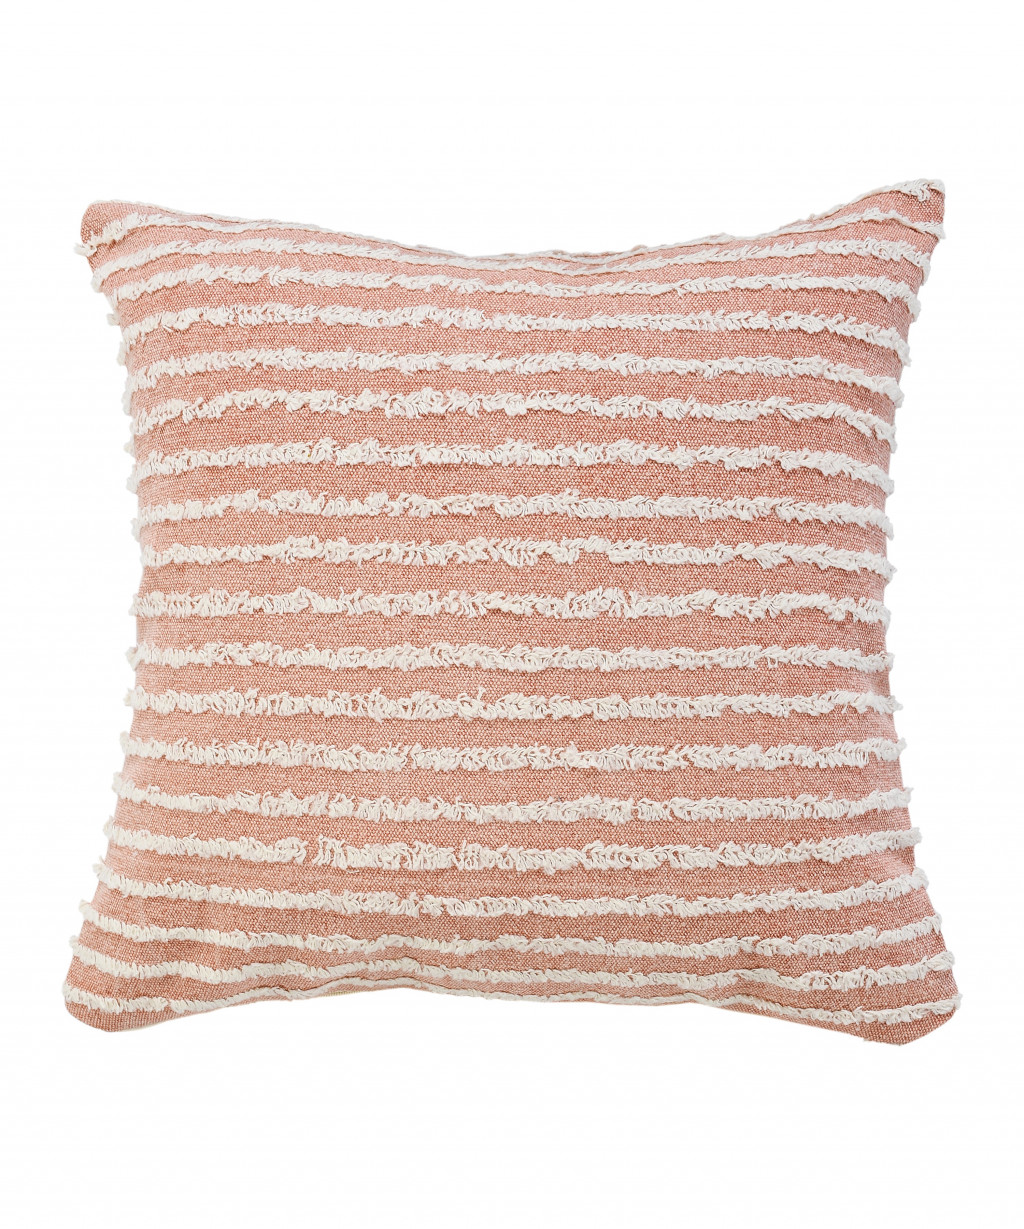 20" X 20" Dusty Pink And Cream 100% Cotton Striped Zippered Pillow-517225-1